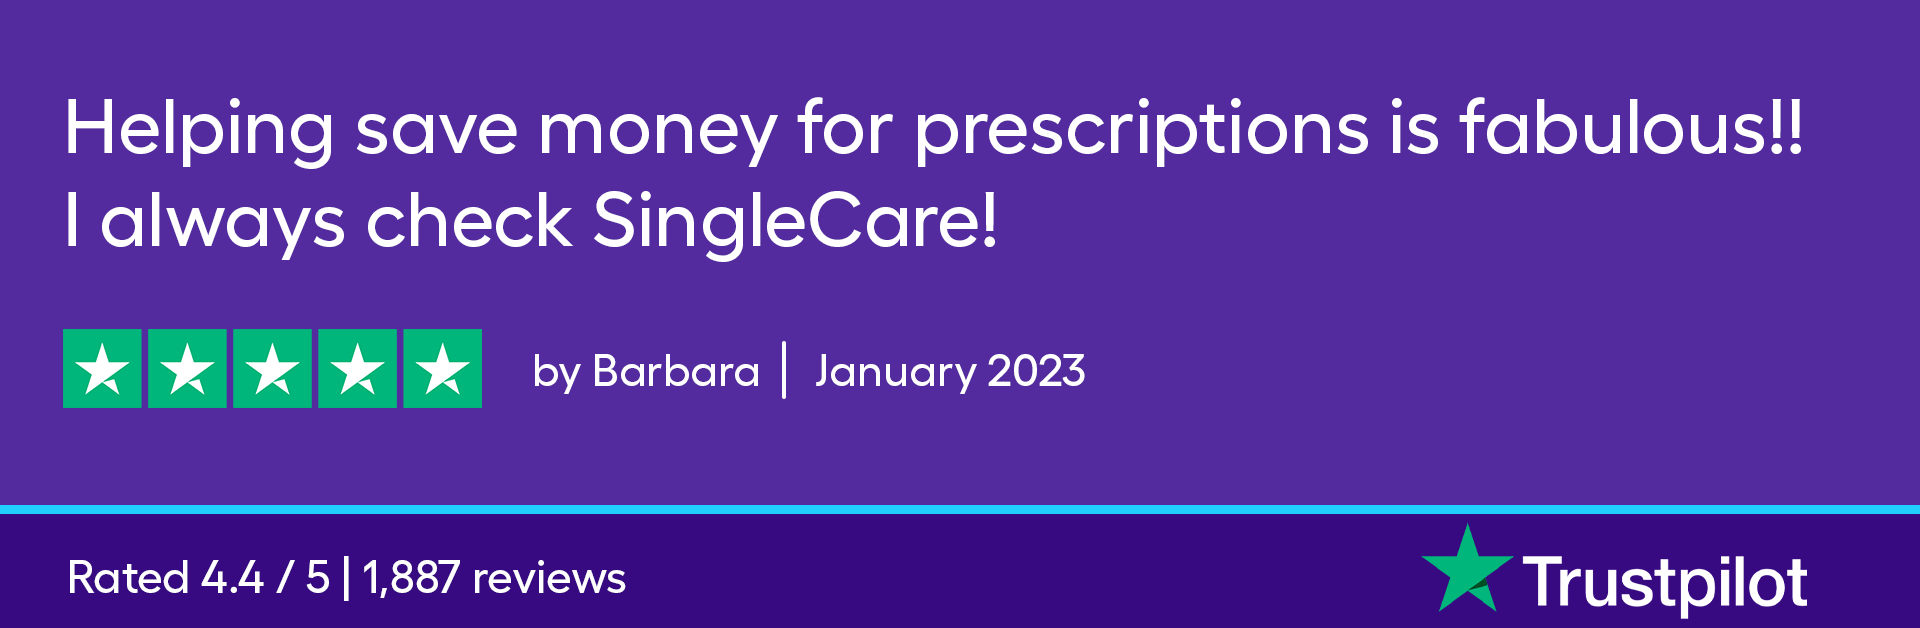 Helping save money for prescriptions is fabulous! I always check SingleCare!